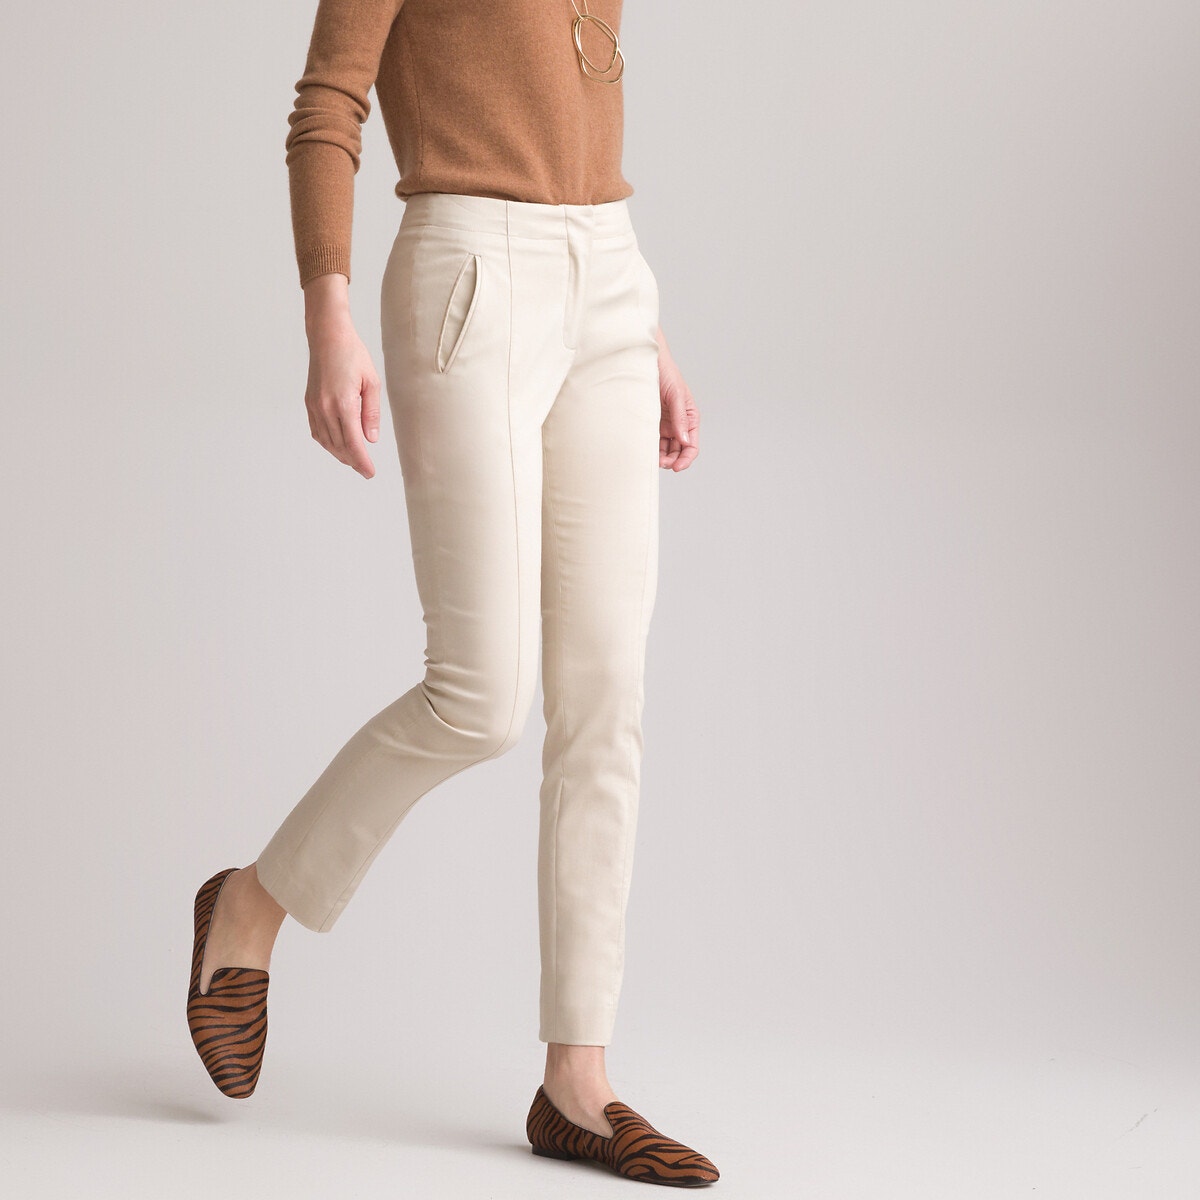 Stretch Straight Trousers in Cotton Mix, Length 30.5